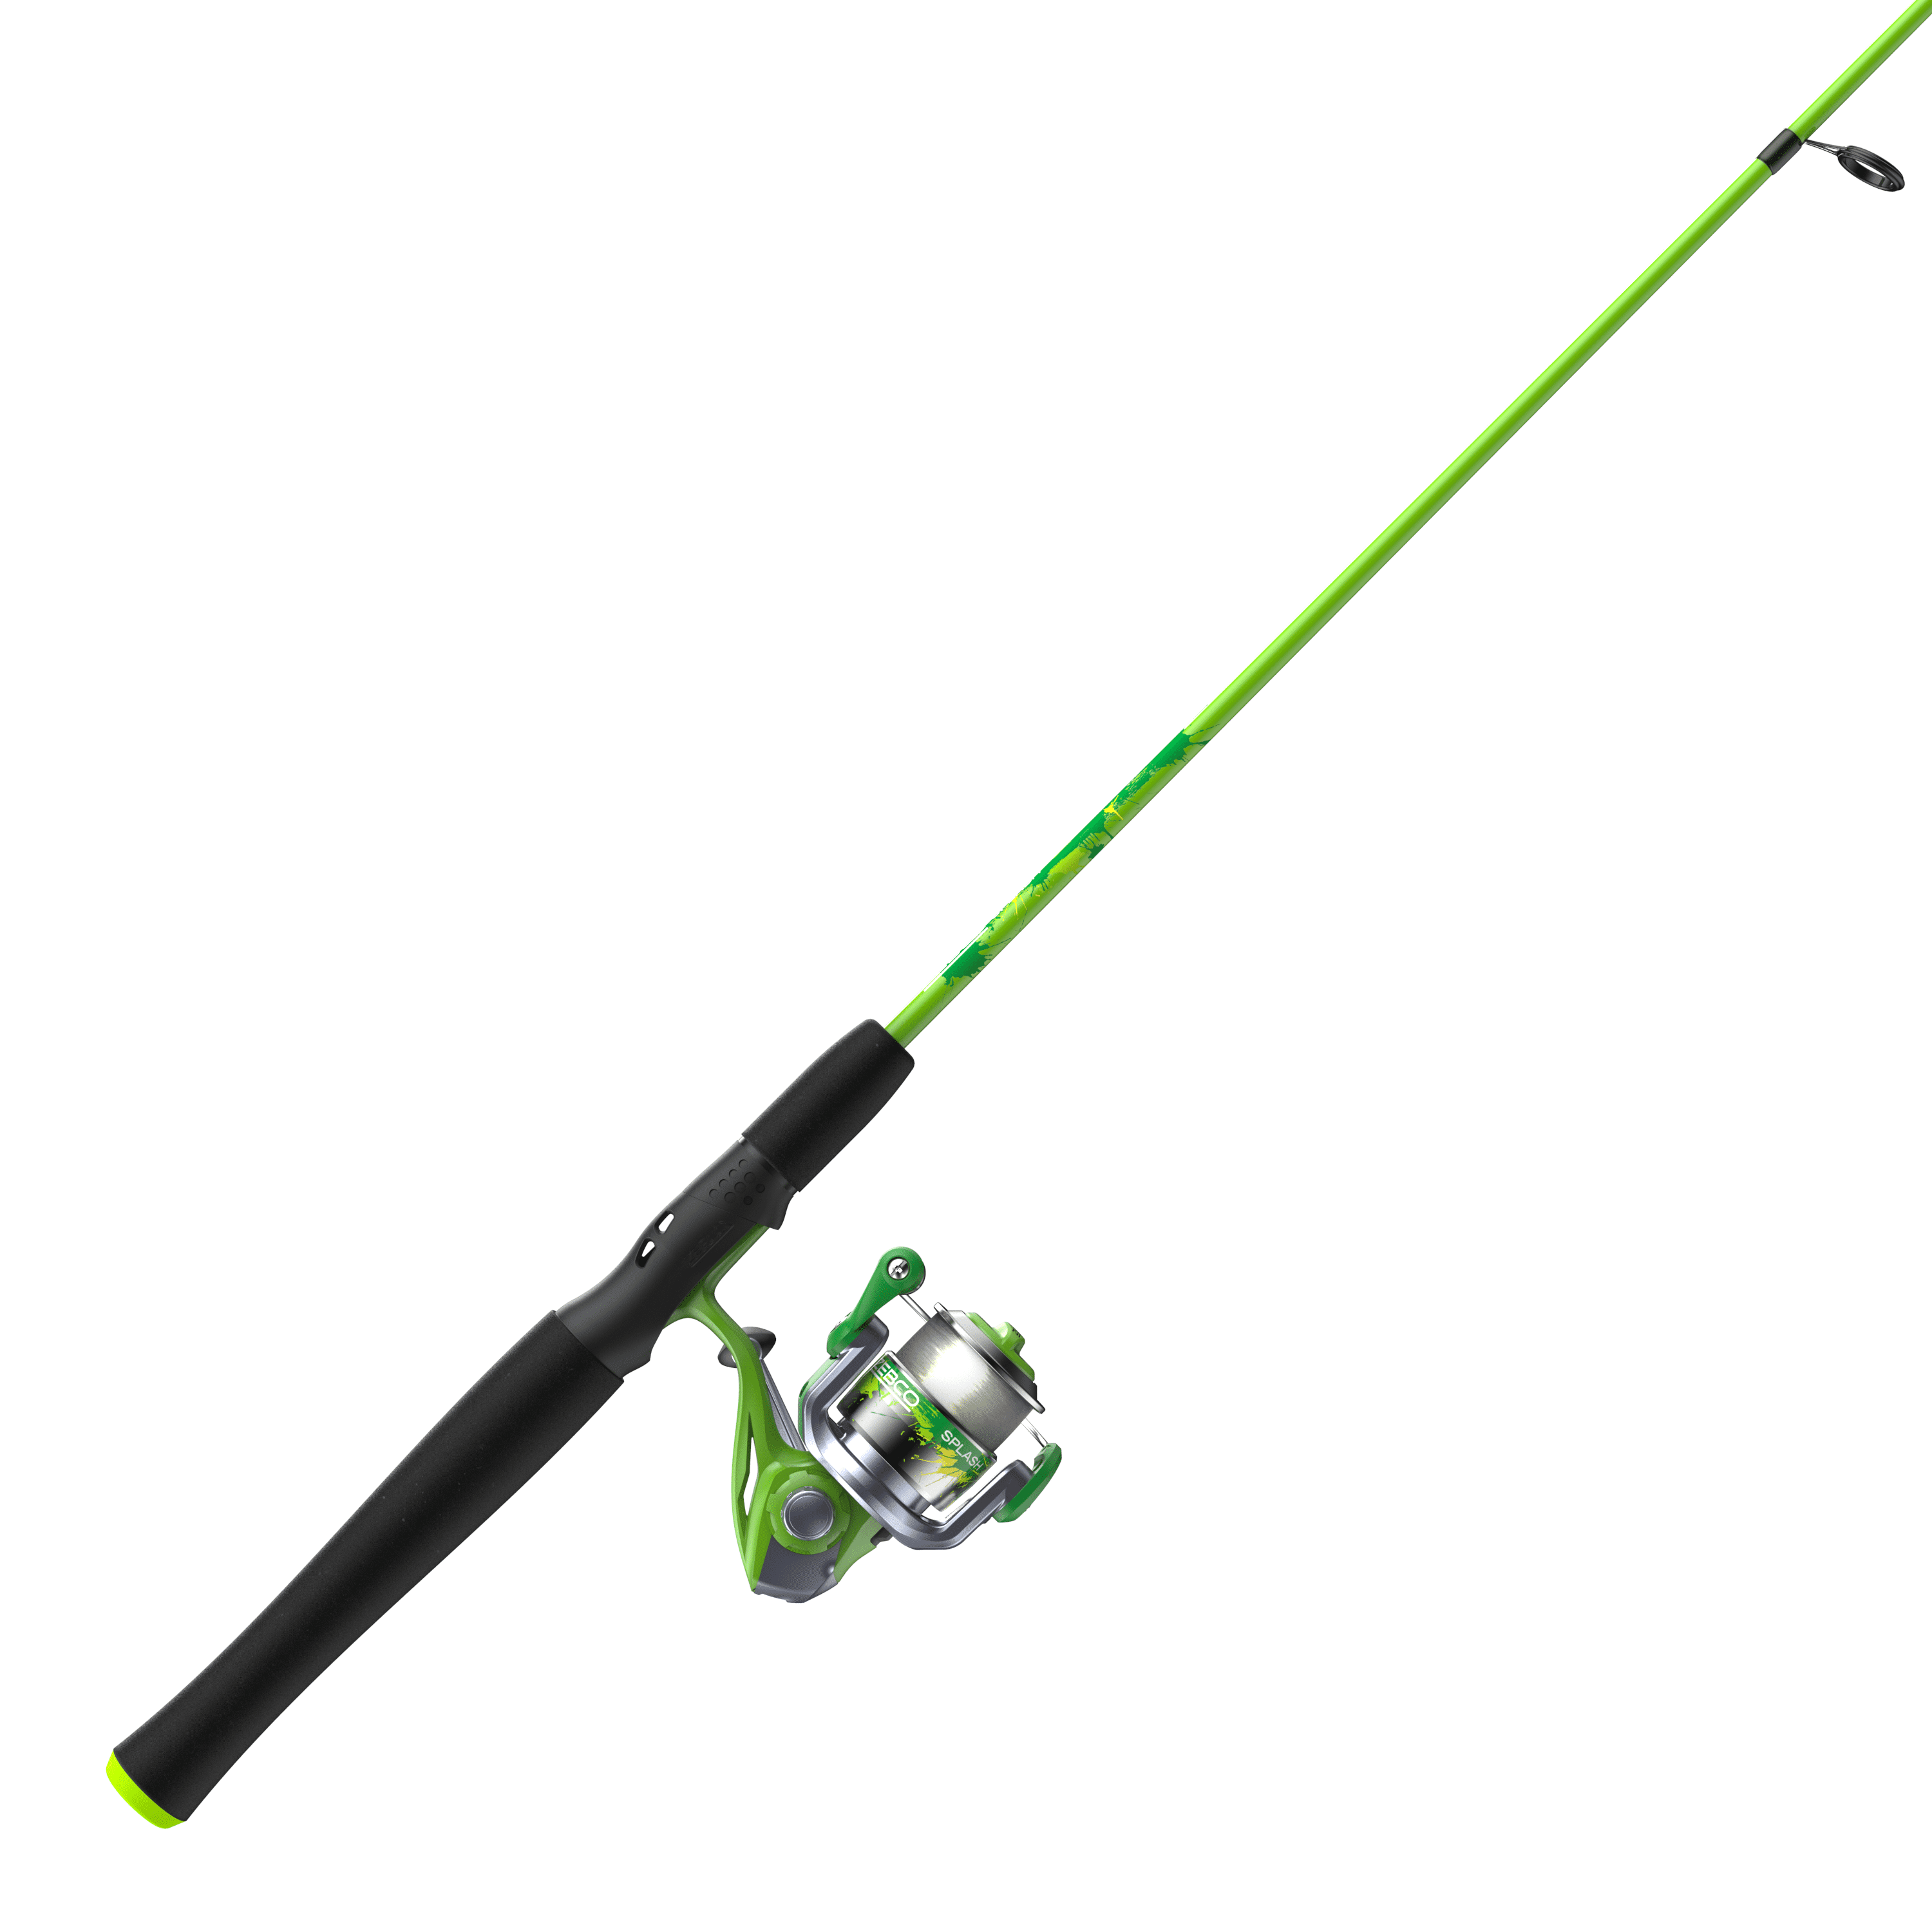 Zebco Splash Spinning Reel and Fishing Rod Combo, 6-Foot 2-Piece Fishing  Pole, Size 20 Reel, Changeable Right- or Left-Hand Retrieve, Pre-Spooled  with 